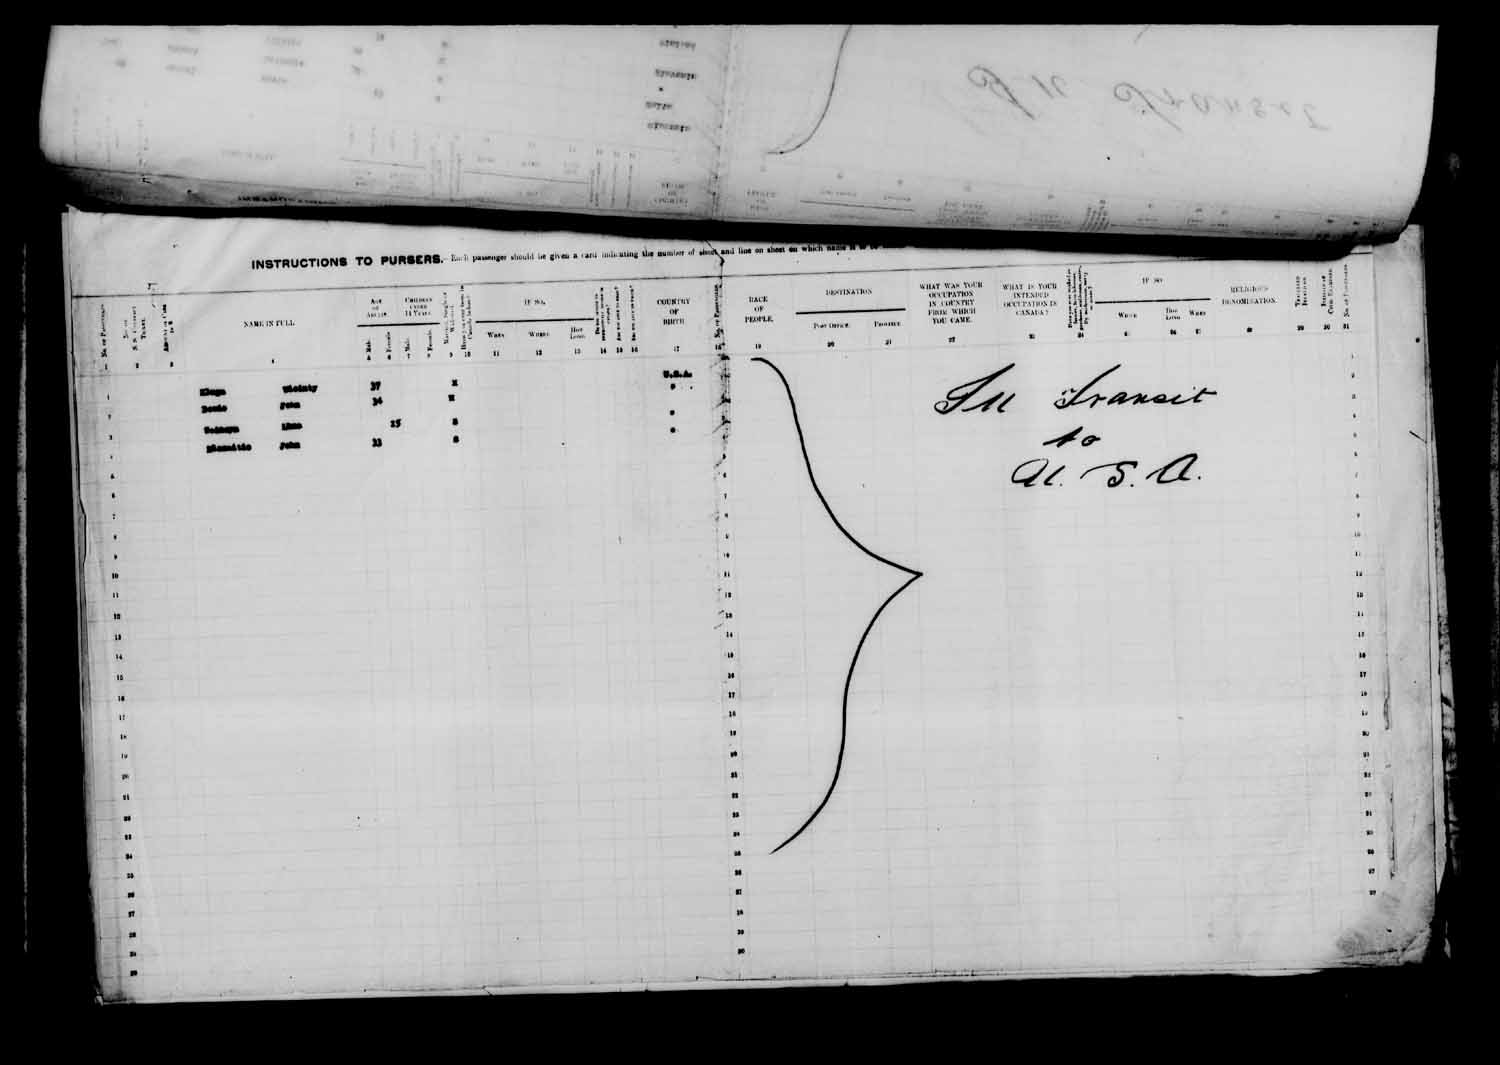 Digitized page of Passenger Lists for Image No.: e003610680